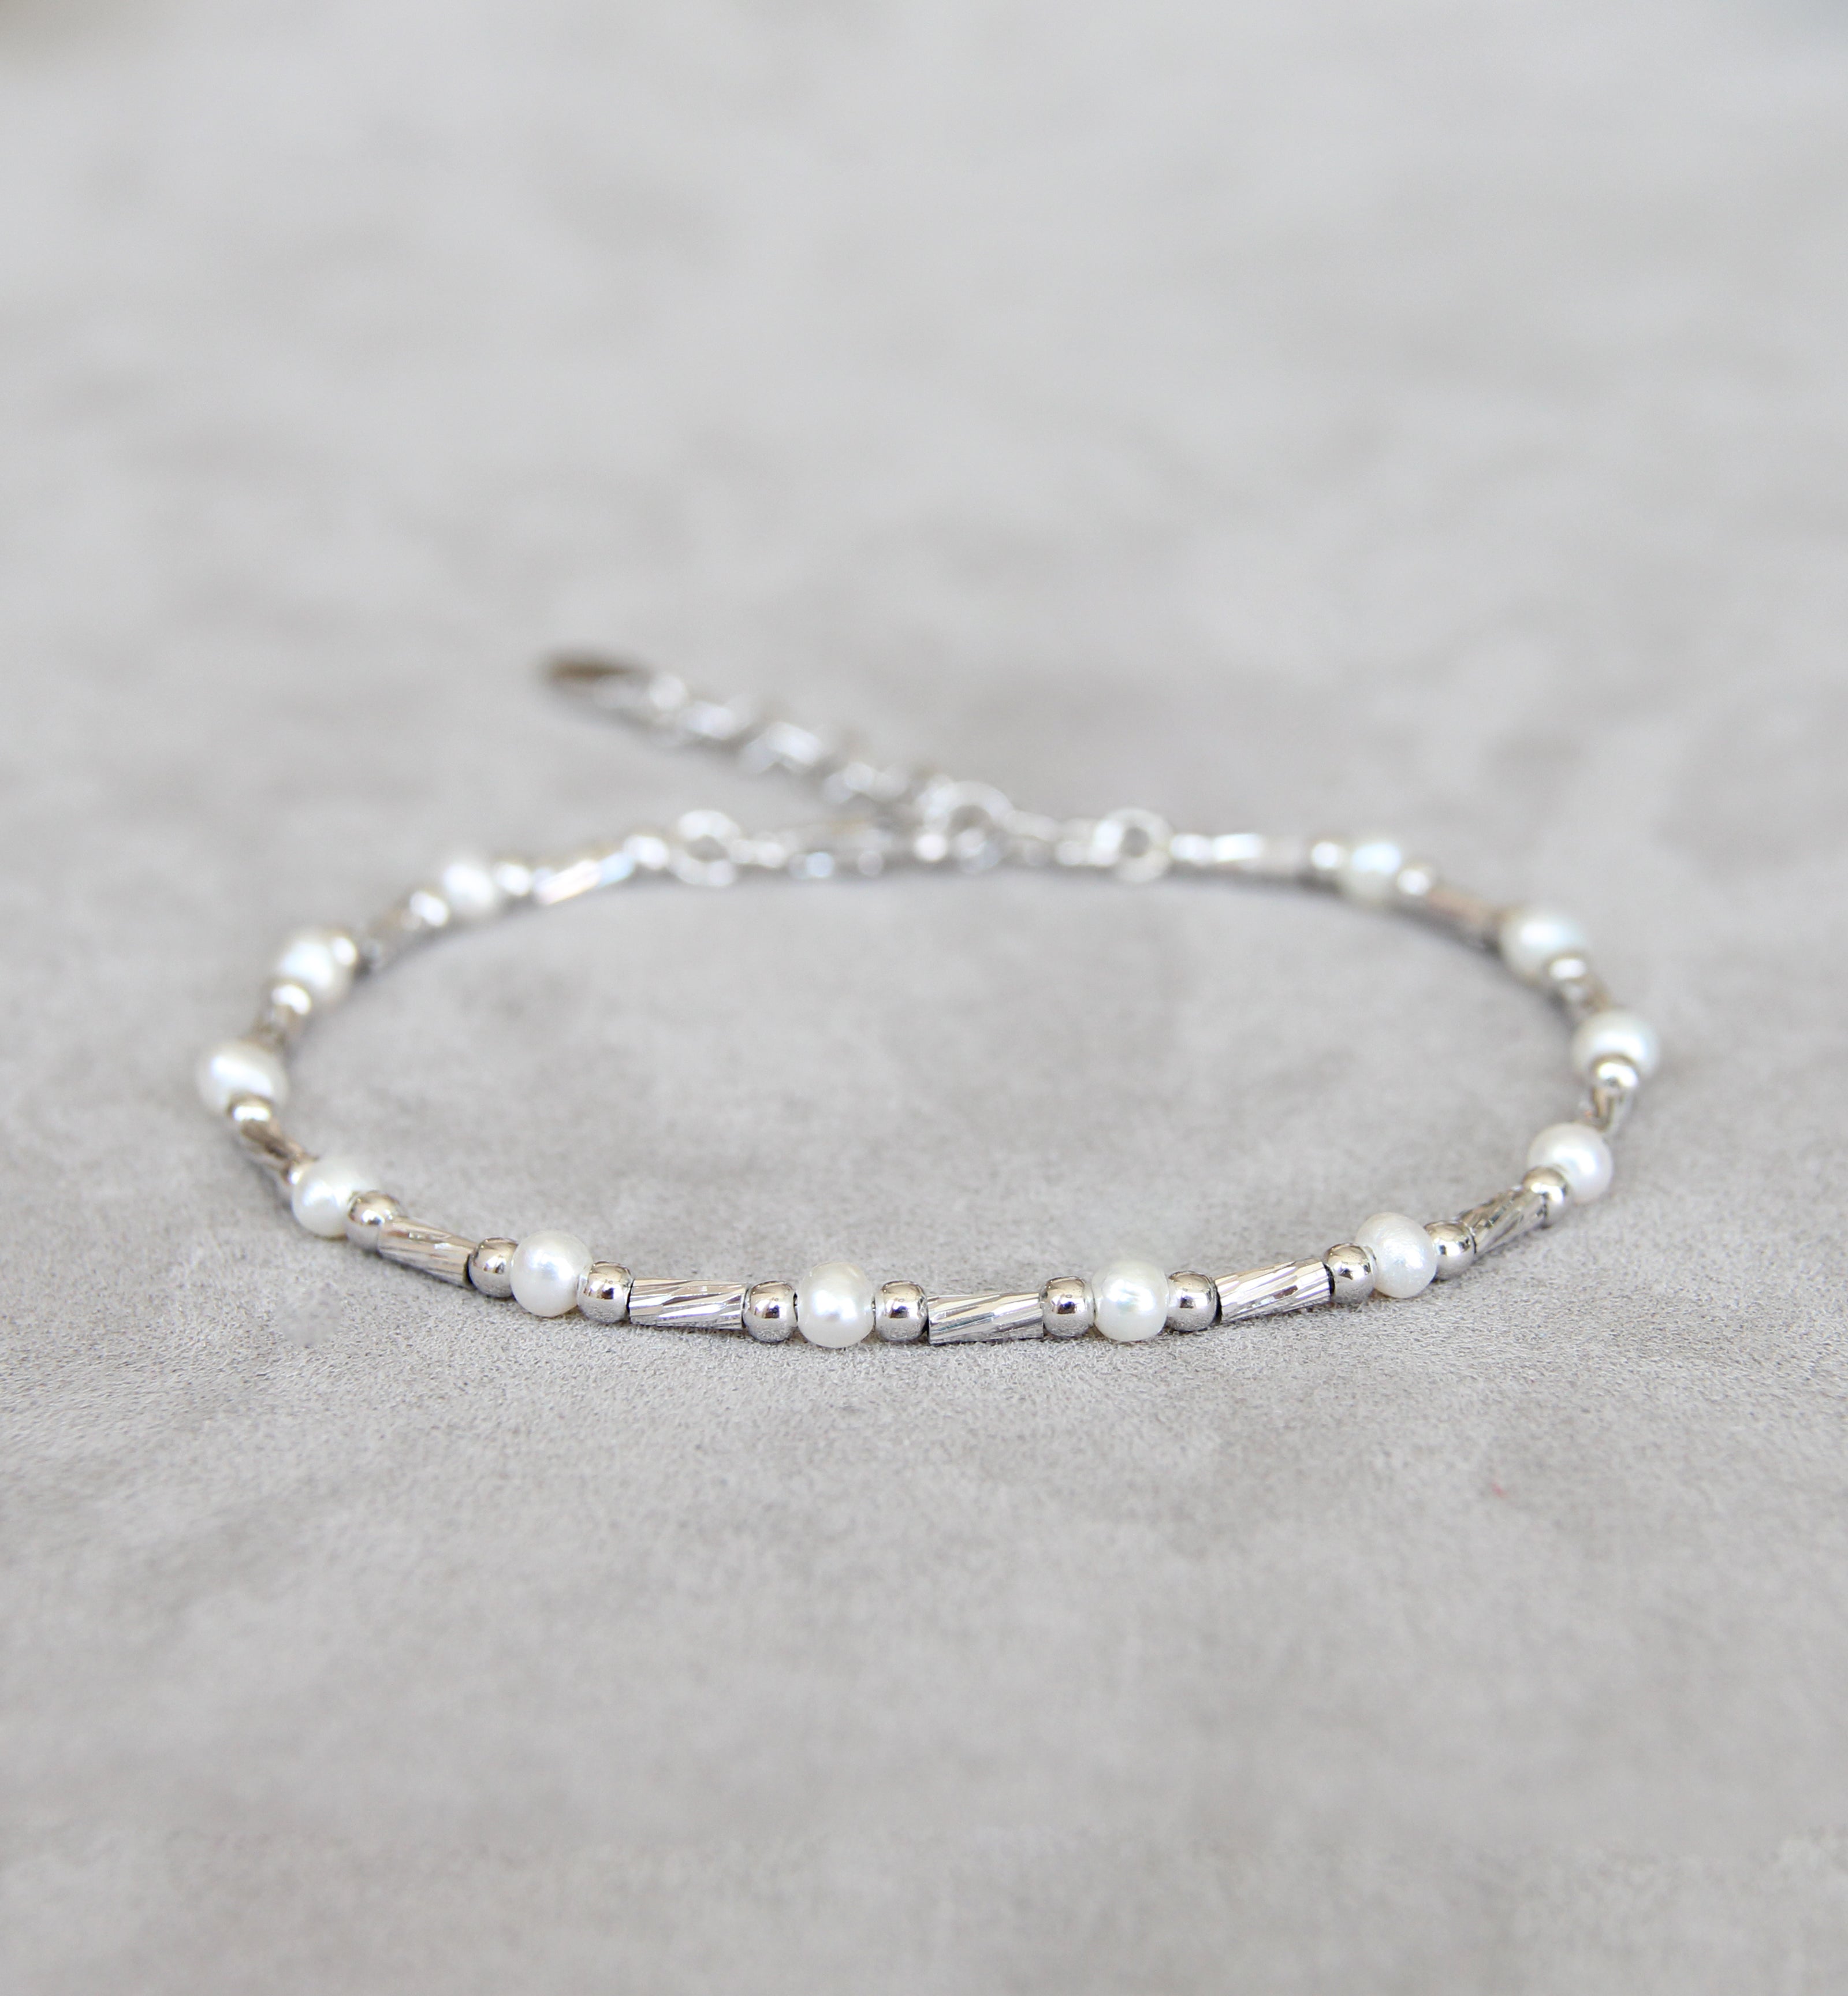 Silver 925 Bracelet with Cultured Pearls